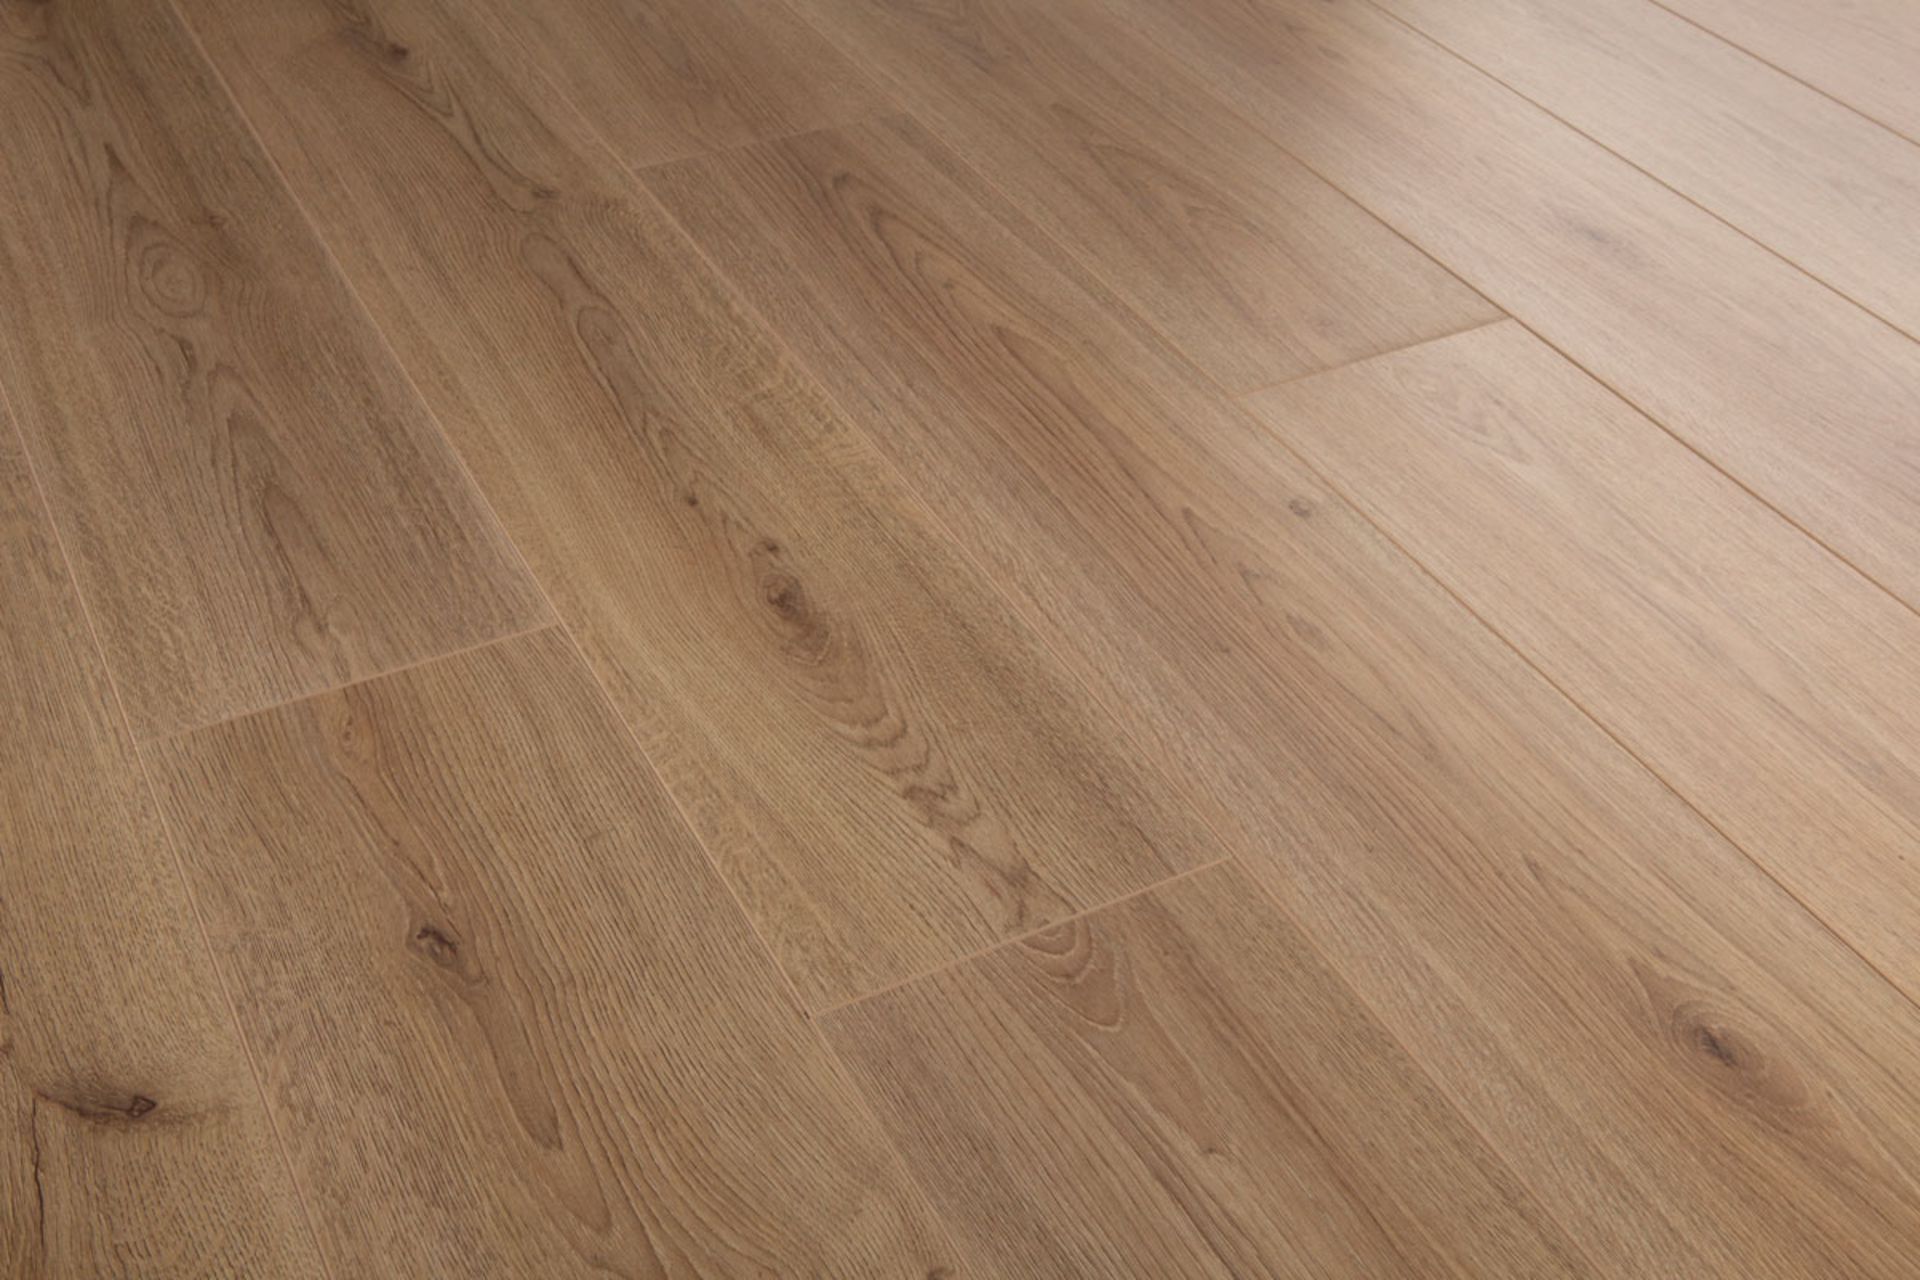 NEW 9.56 Square Meters of LAMINATE FLOORING TREND NATURE OAK. With a warm natural tone and a co... - Image 2 of 3